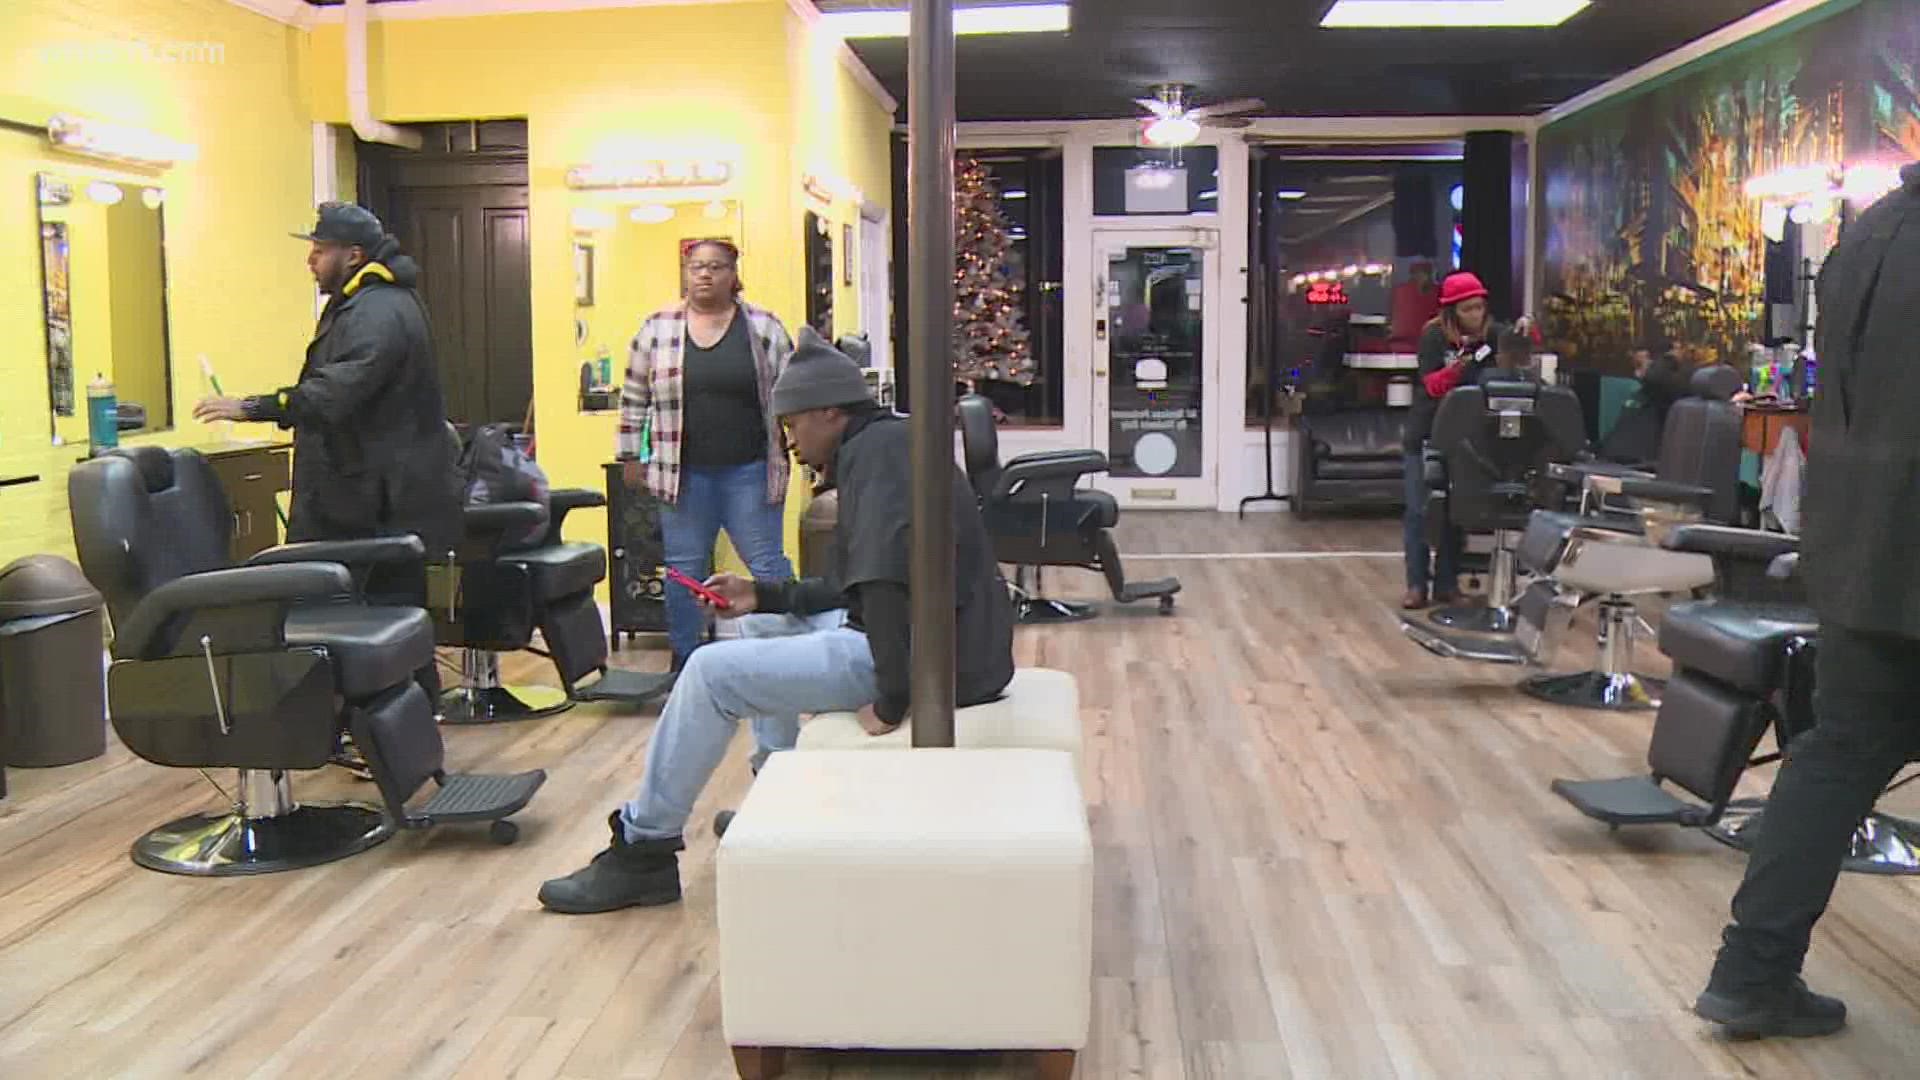 Louisville recording artist and music producer Vory announced Saturday he's sending ten local teens to the Barber Academy in Jeffersonville, Indiana.